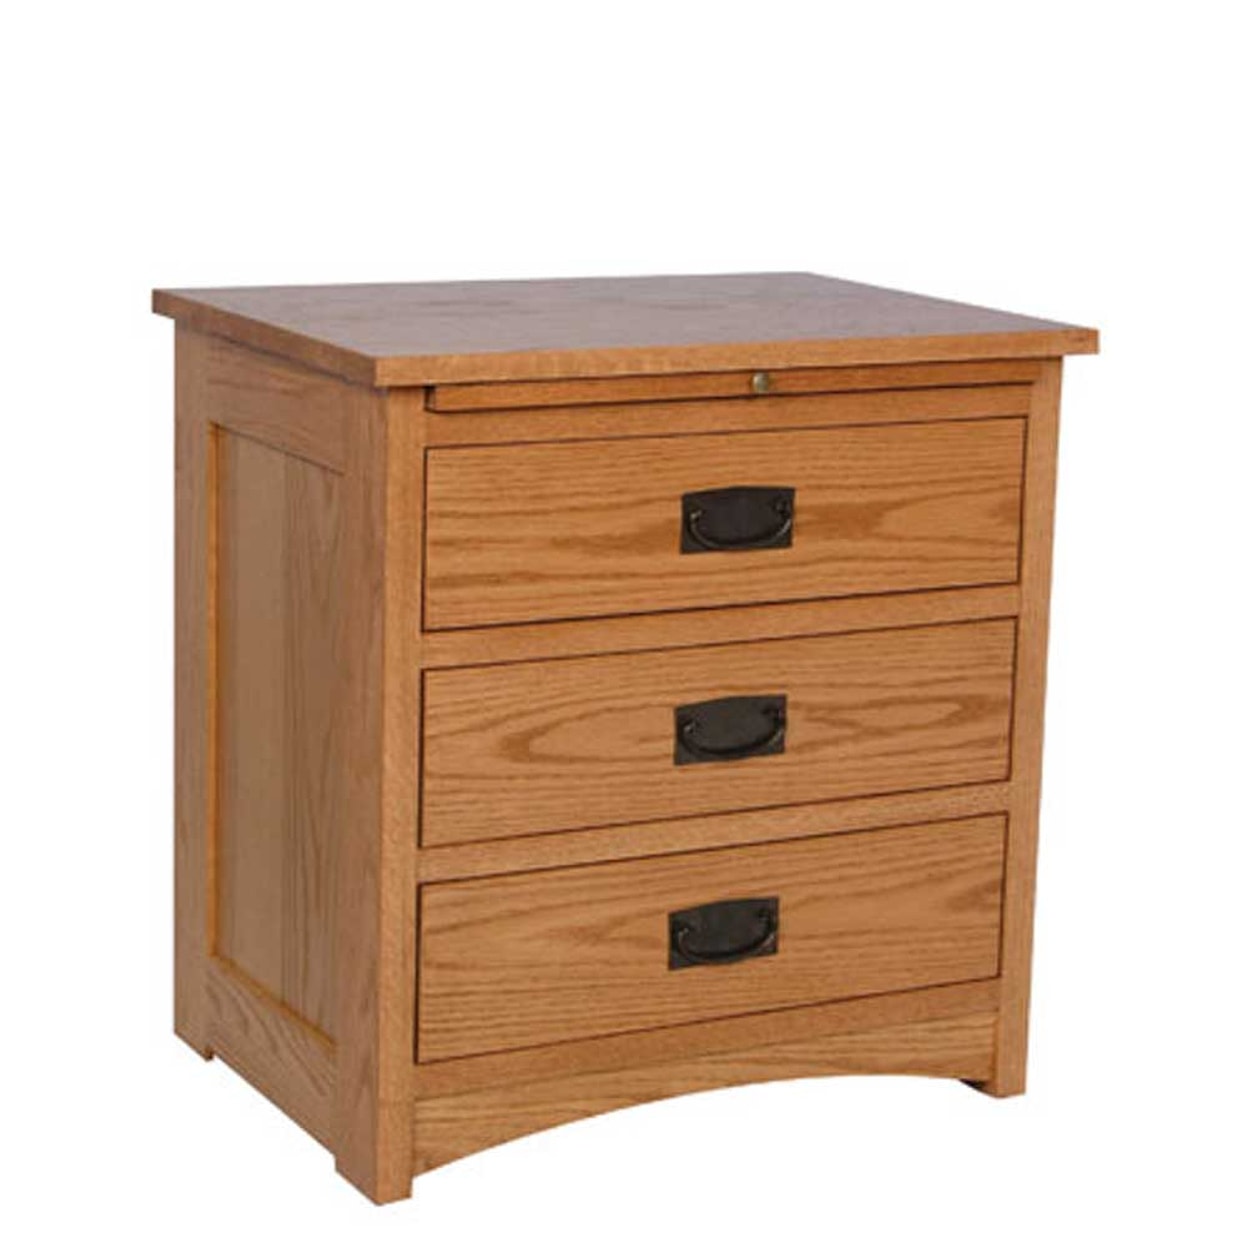 Simply Amish Prairie Mission Bedside Chest